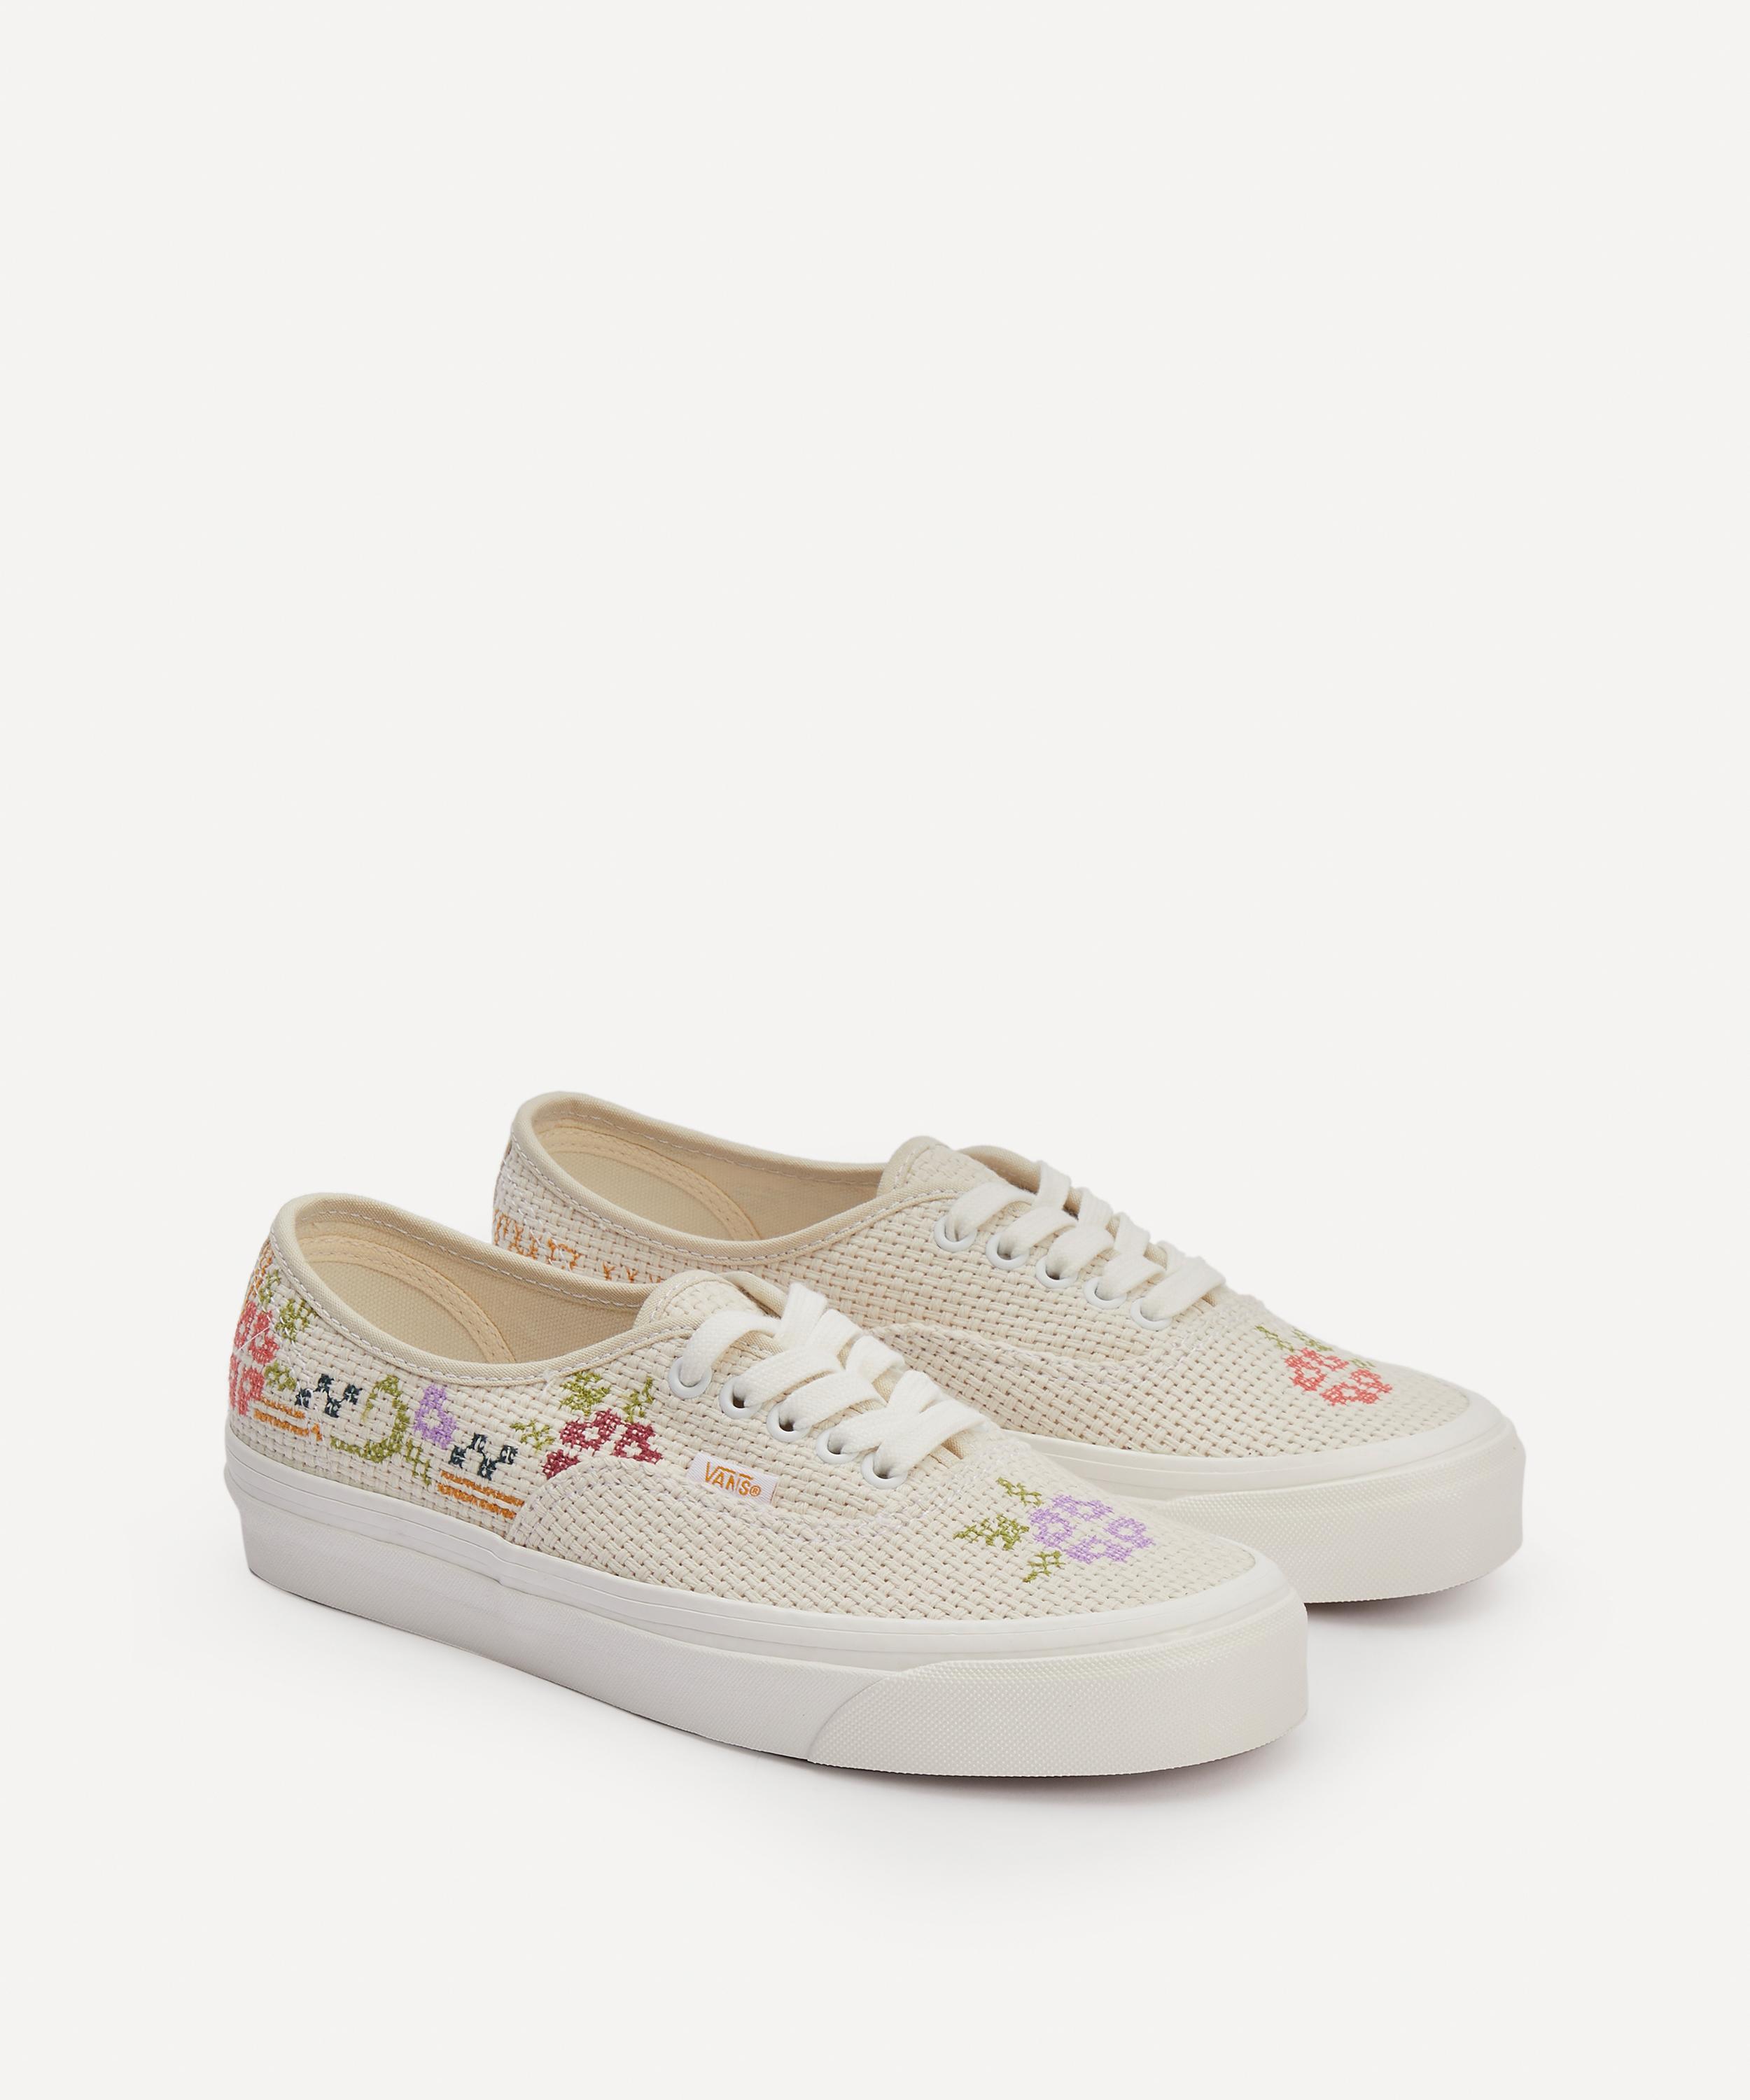 Vans Leather Anaheim Factory Authentic 44 Dx Shoes in White | Lyst Canada